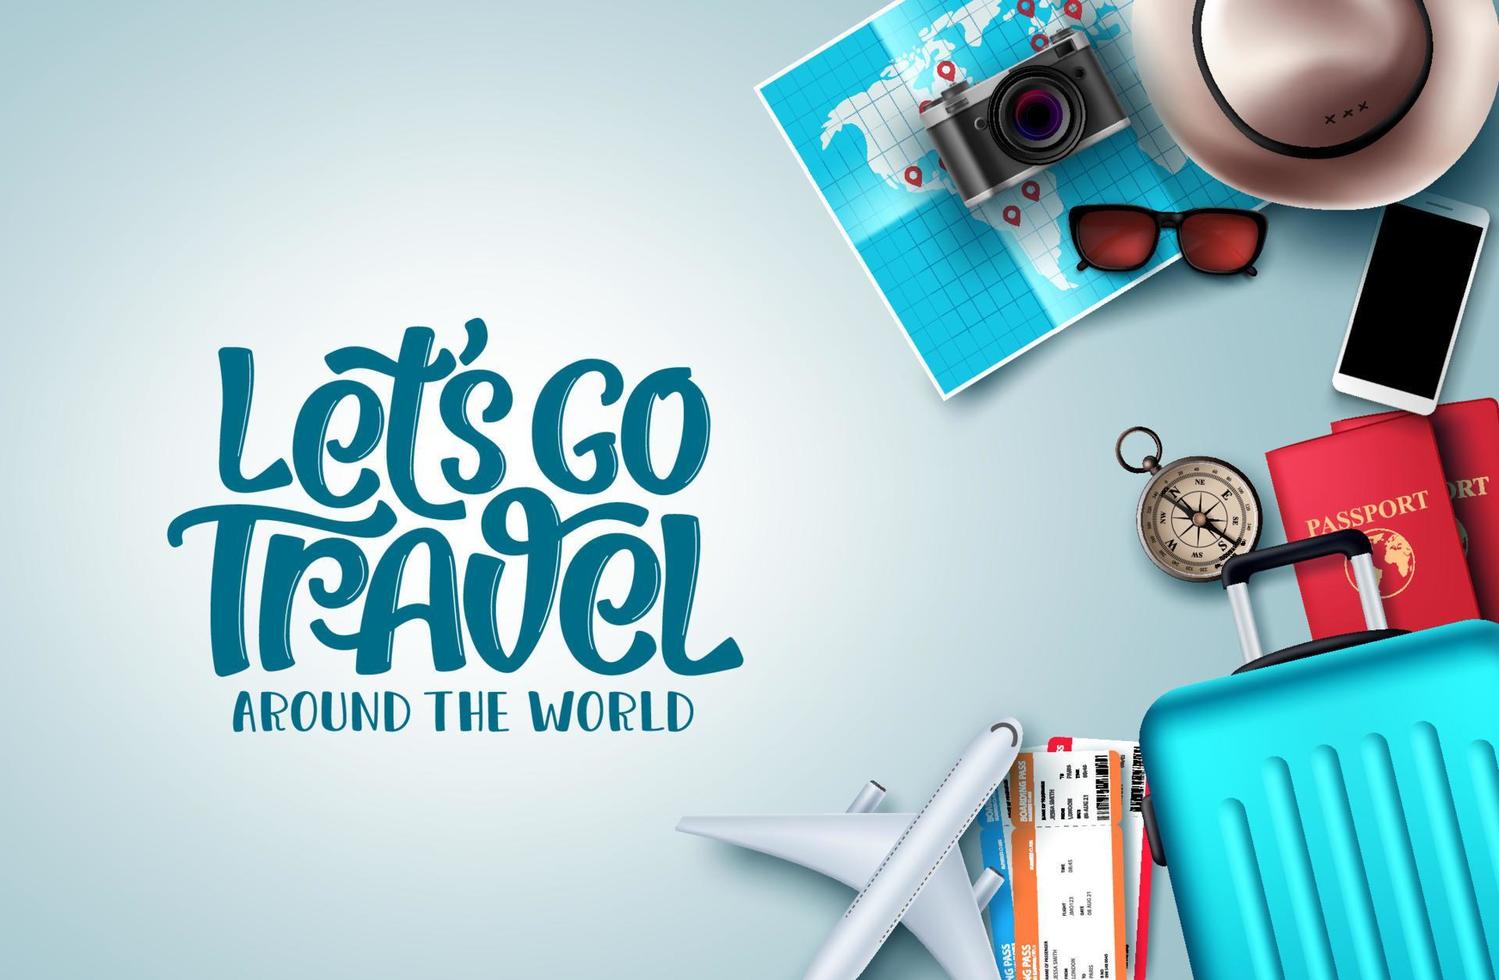 Let's go travel vector background design. Let's go travel around the world  text in white empty space with travel vacation and tour elements like  passport, tourism map, compass and hat. 4928933 Vector